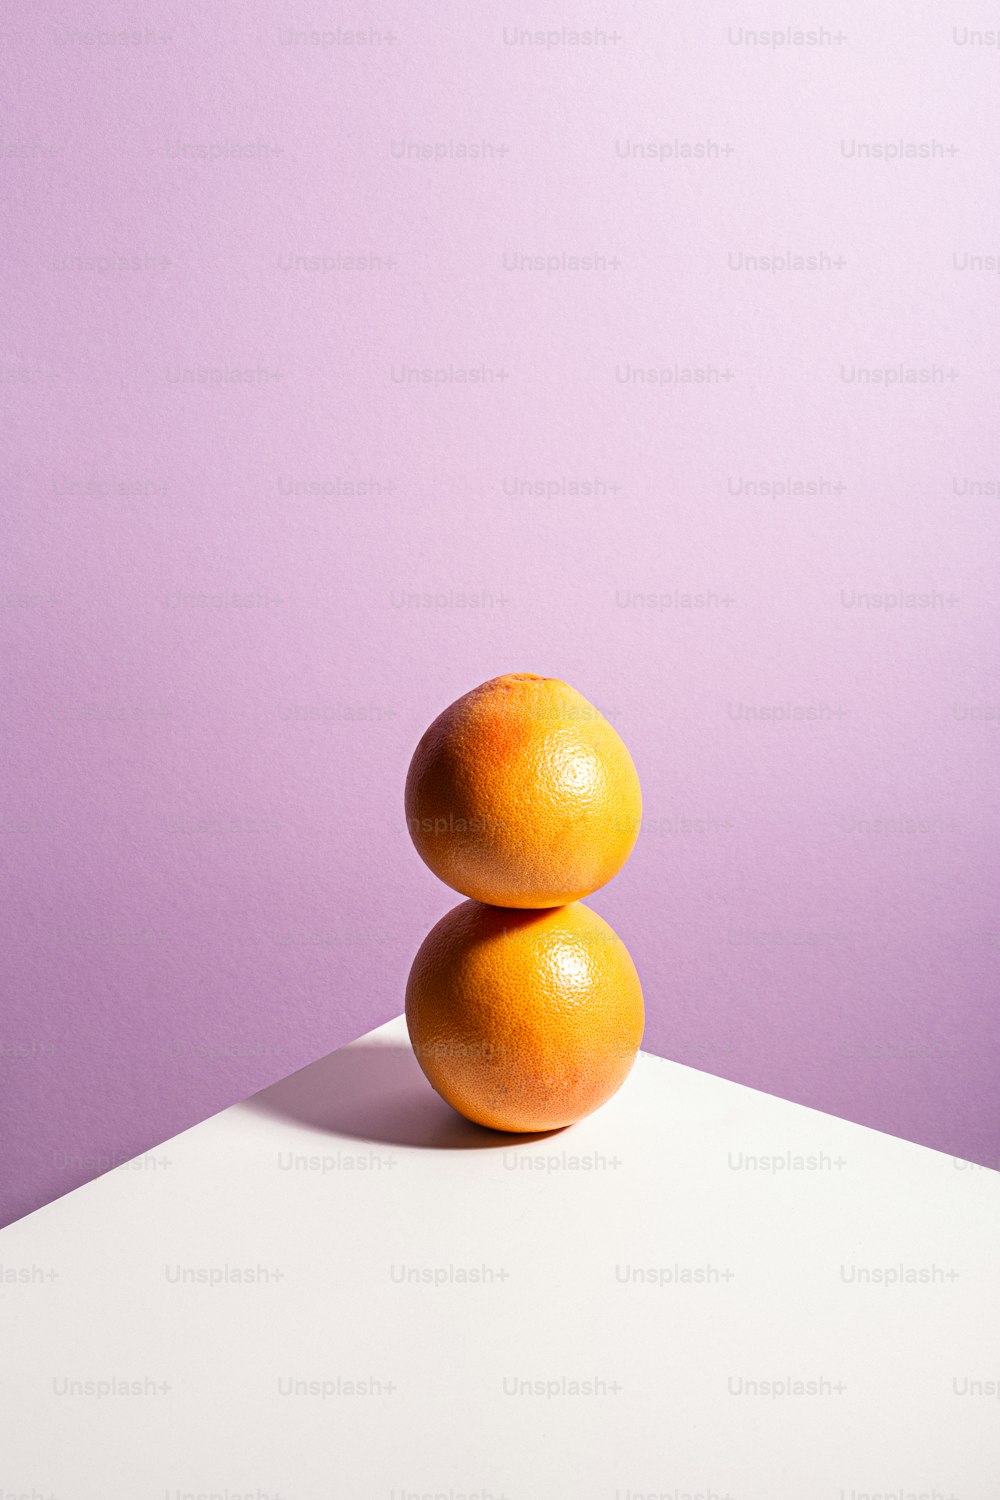 two oranges stacked on top of each other on a table